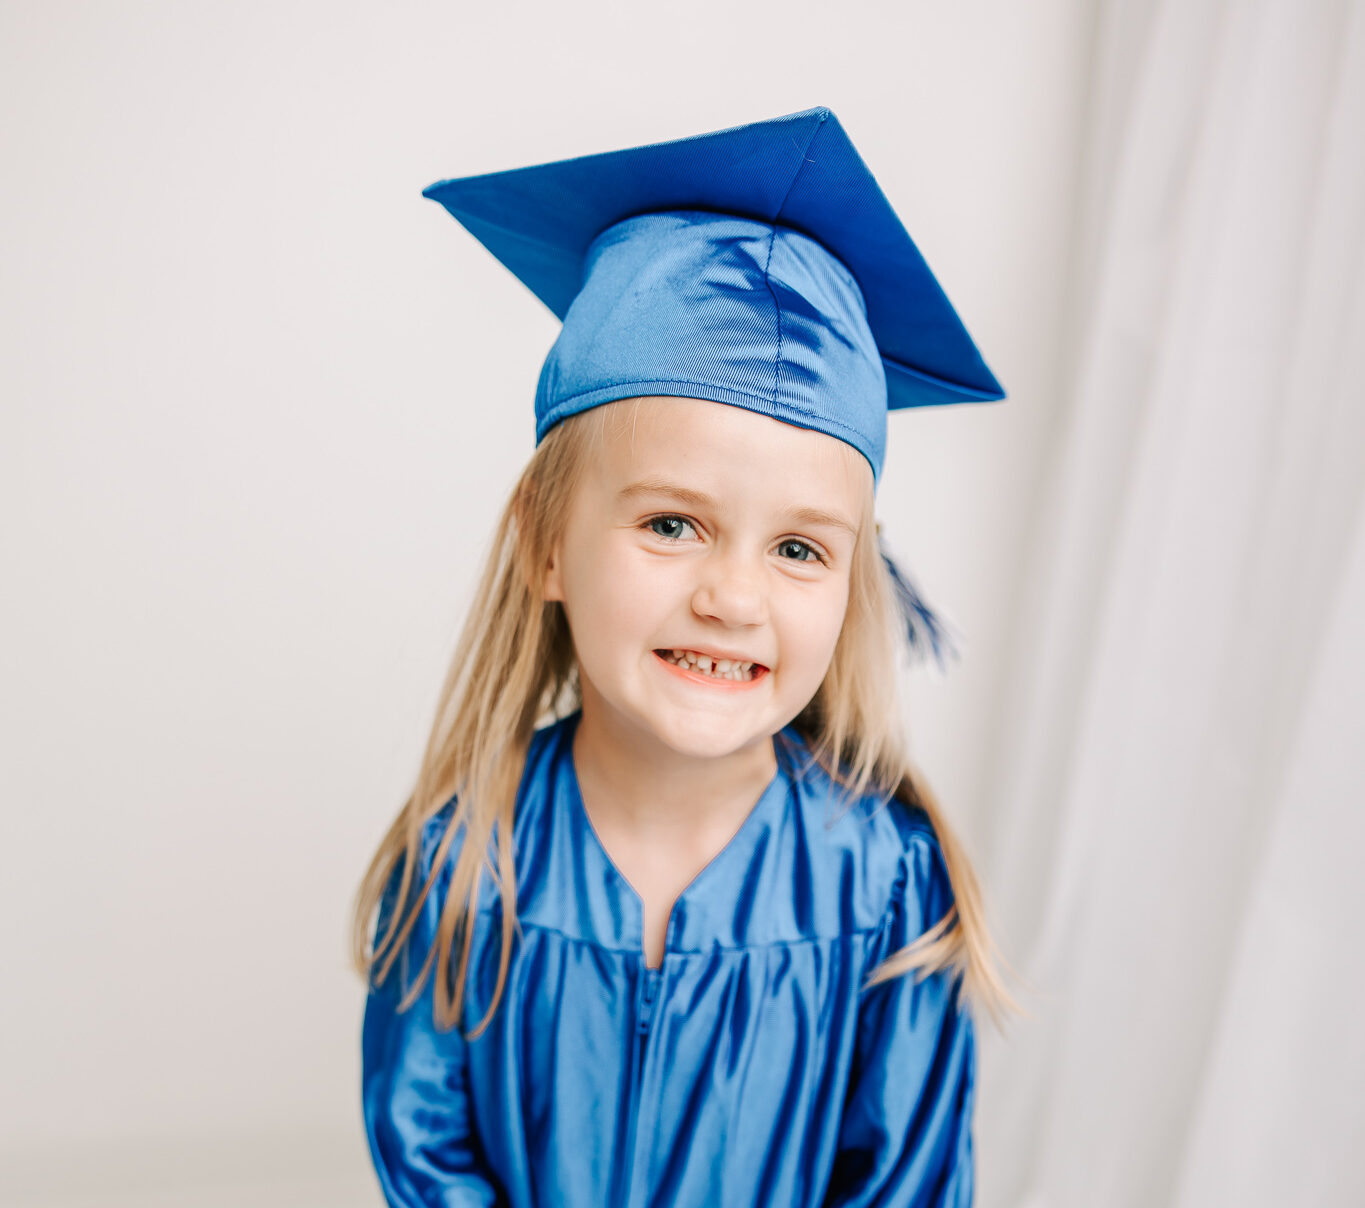 Sweet little girl dancing and twirling in her cap and gown in the augusta studio.